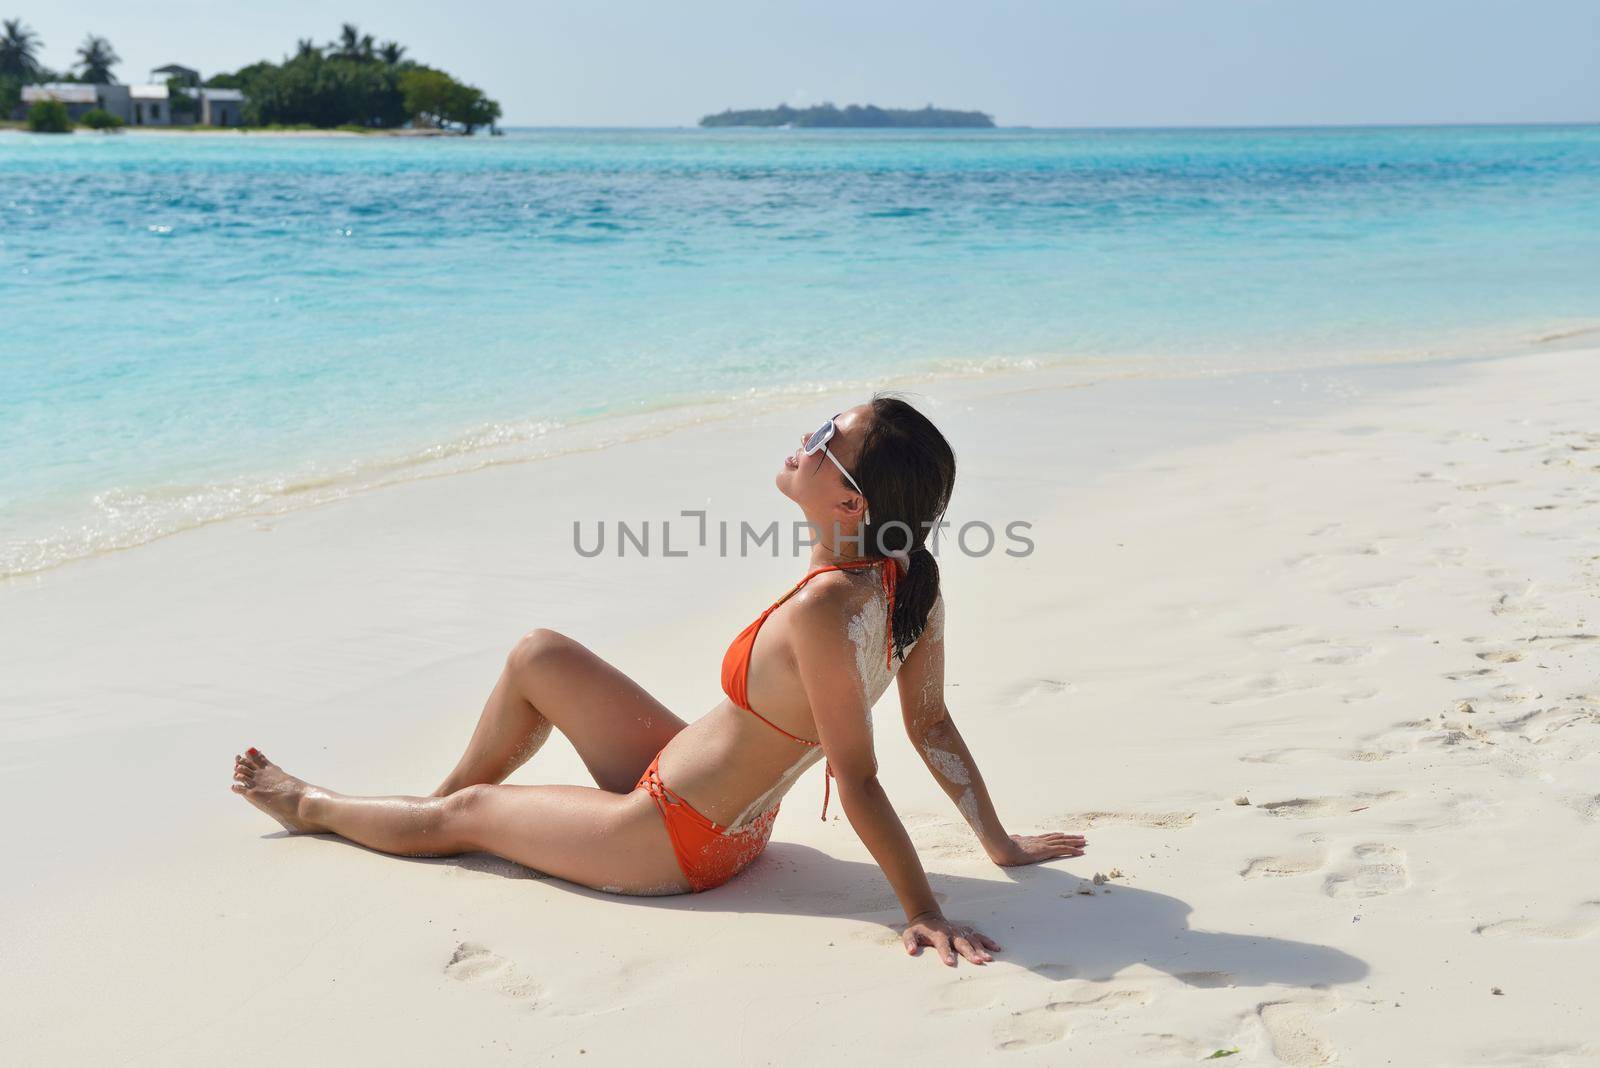 beautifel and happy woman girl on beach have fun and relax on summer vacation  over the sea